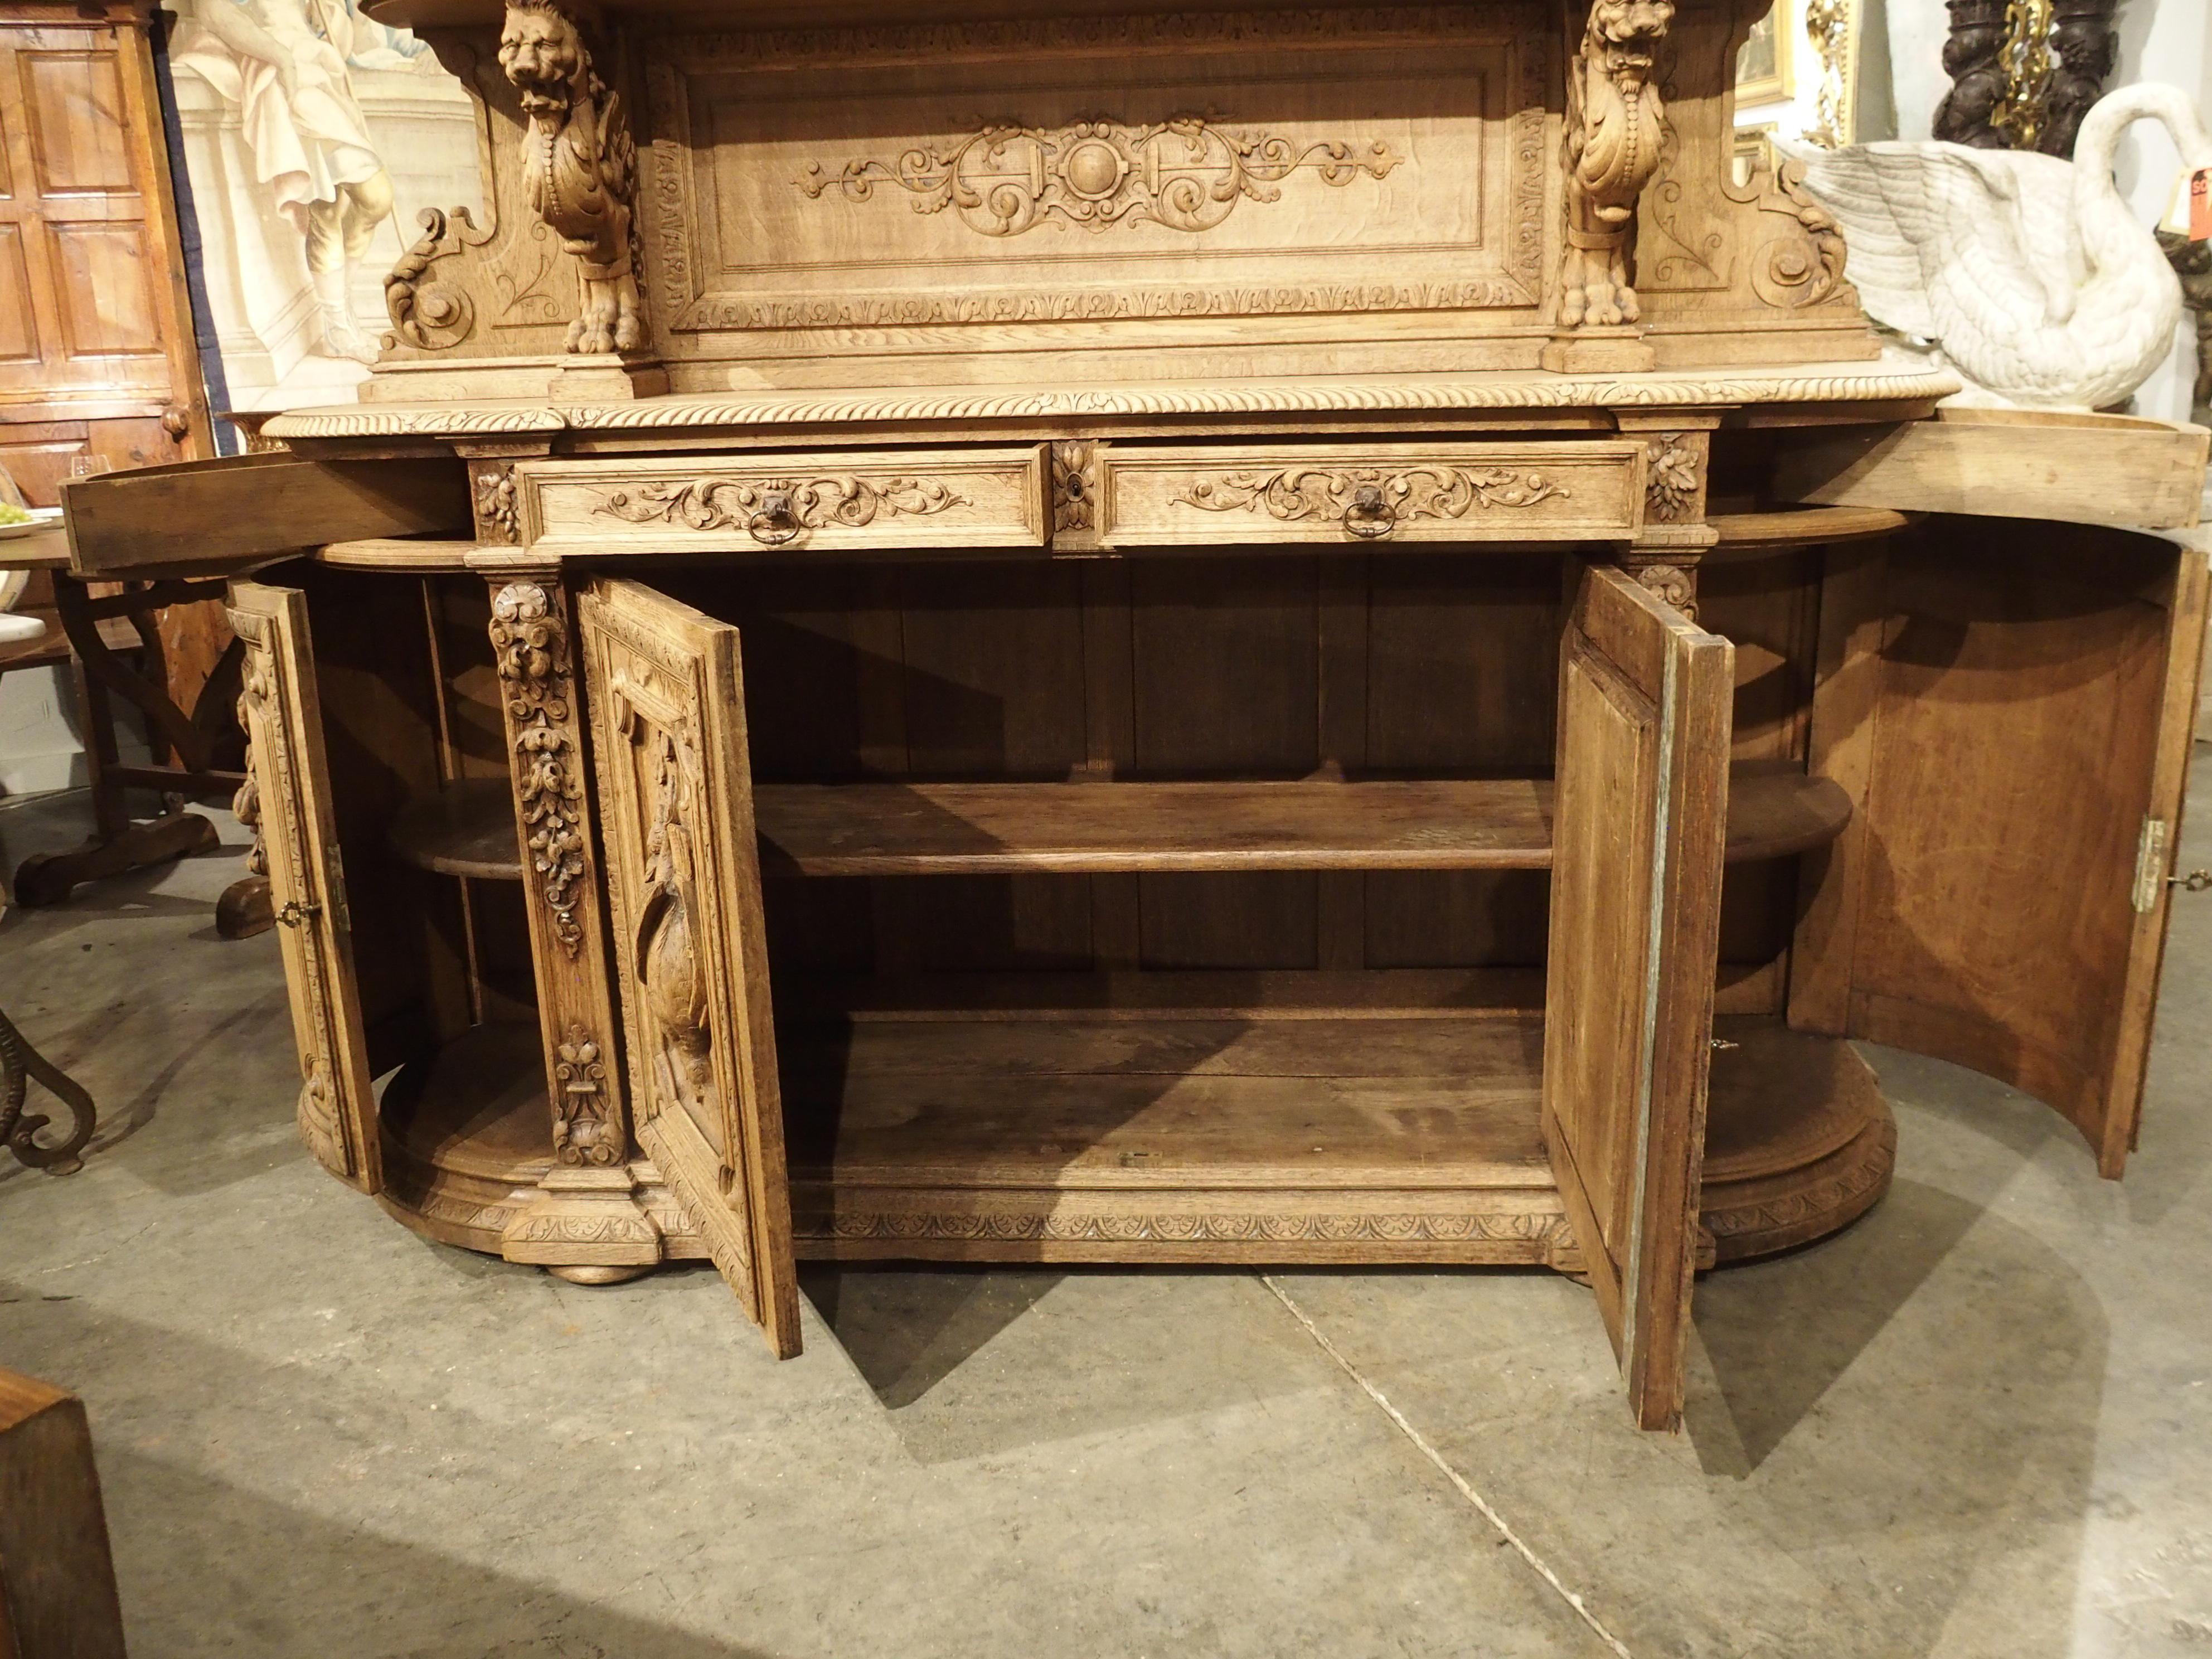 Known as a “St Hubert”, this impressive oak hunt buffet features a well-carved back wall with two shelves set above a traditional buffet body. This structure, as well as the presence of the highly detailed and scrolled pilasters, are hallmarks of a